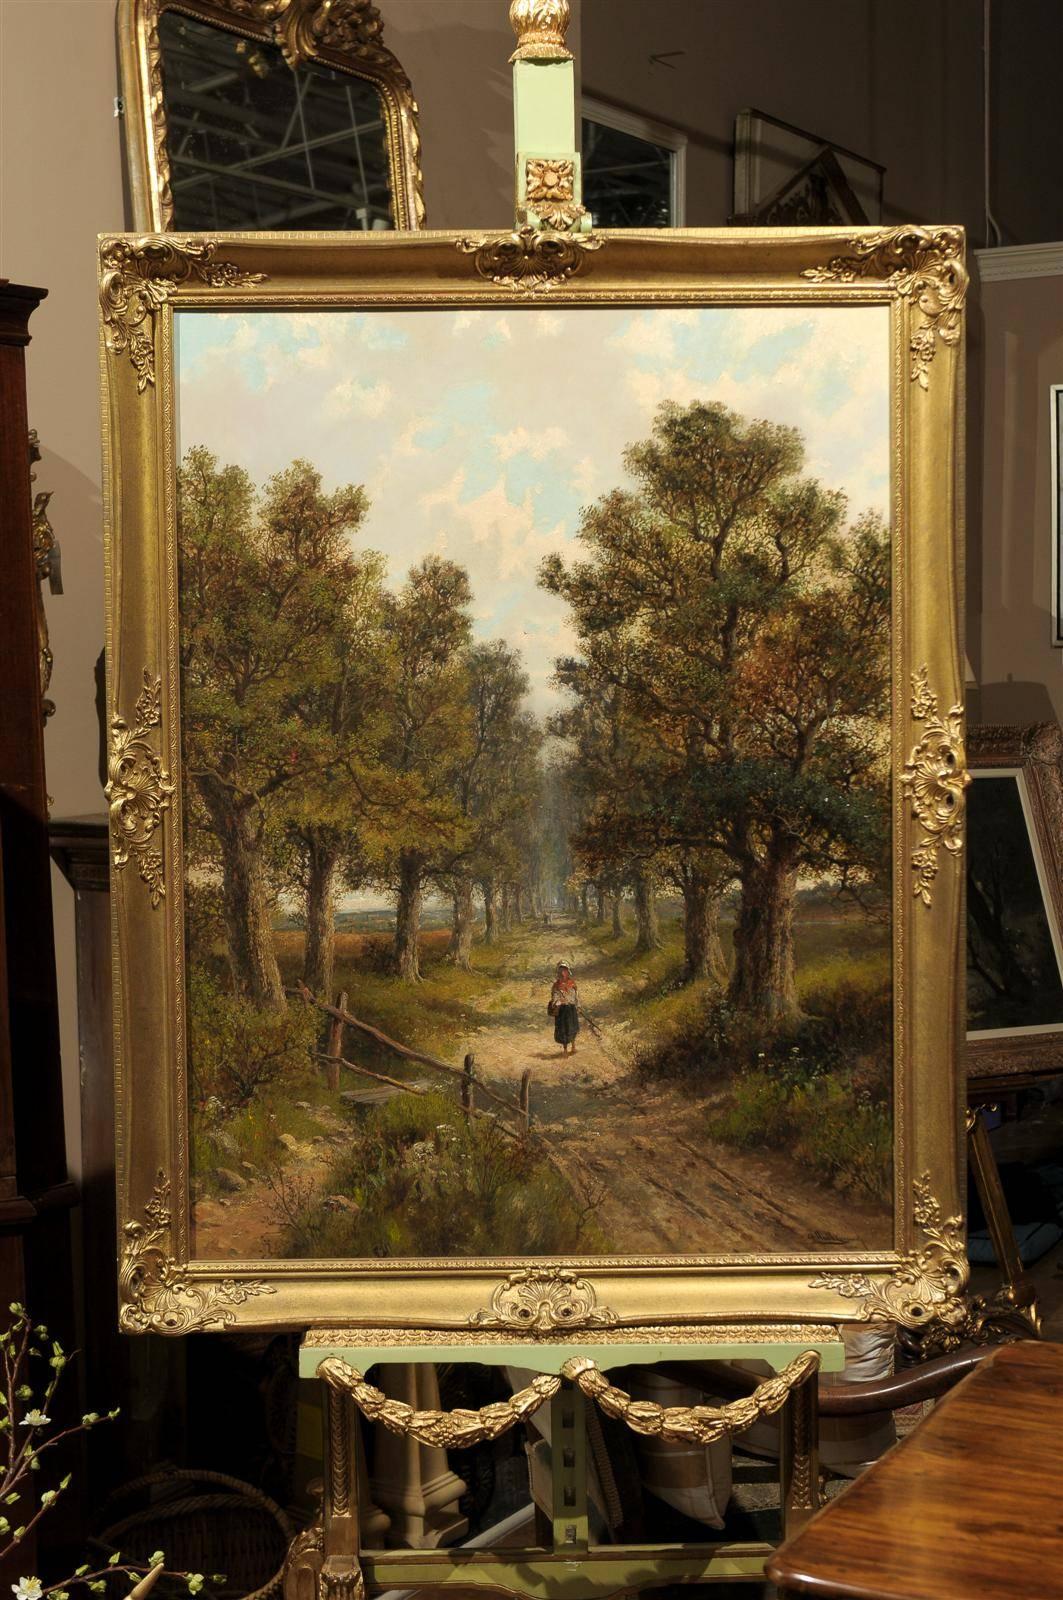 A lovely English landscape of a woman walking down a country path 
aligned by trees.
By: A Hulk, Jr., born in 1851. Signed oil painting. He was a British visual artist. He lived most of his life in Southern England painting traditional landscapes.